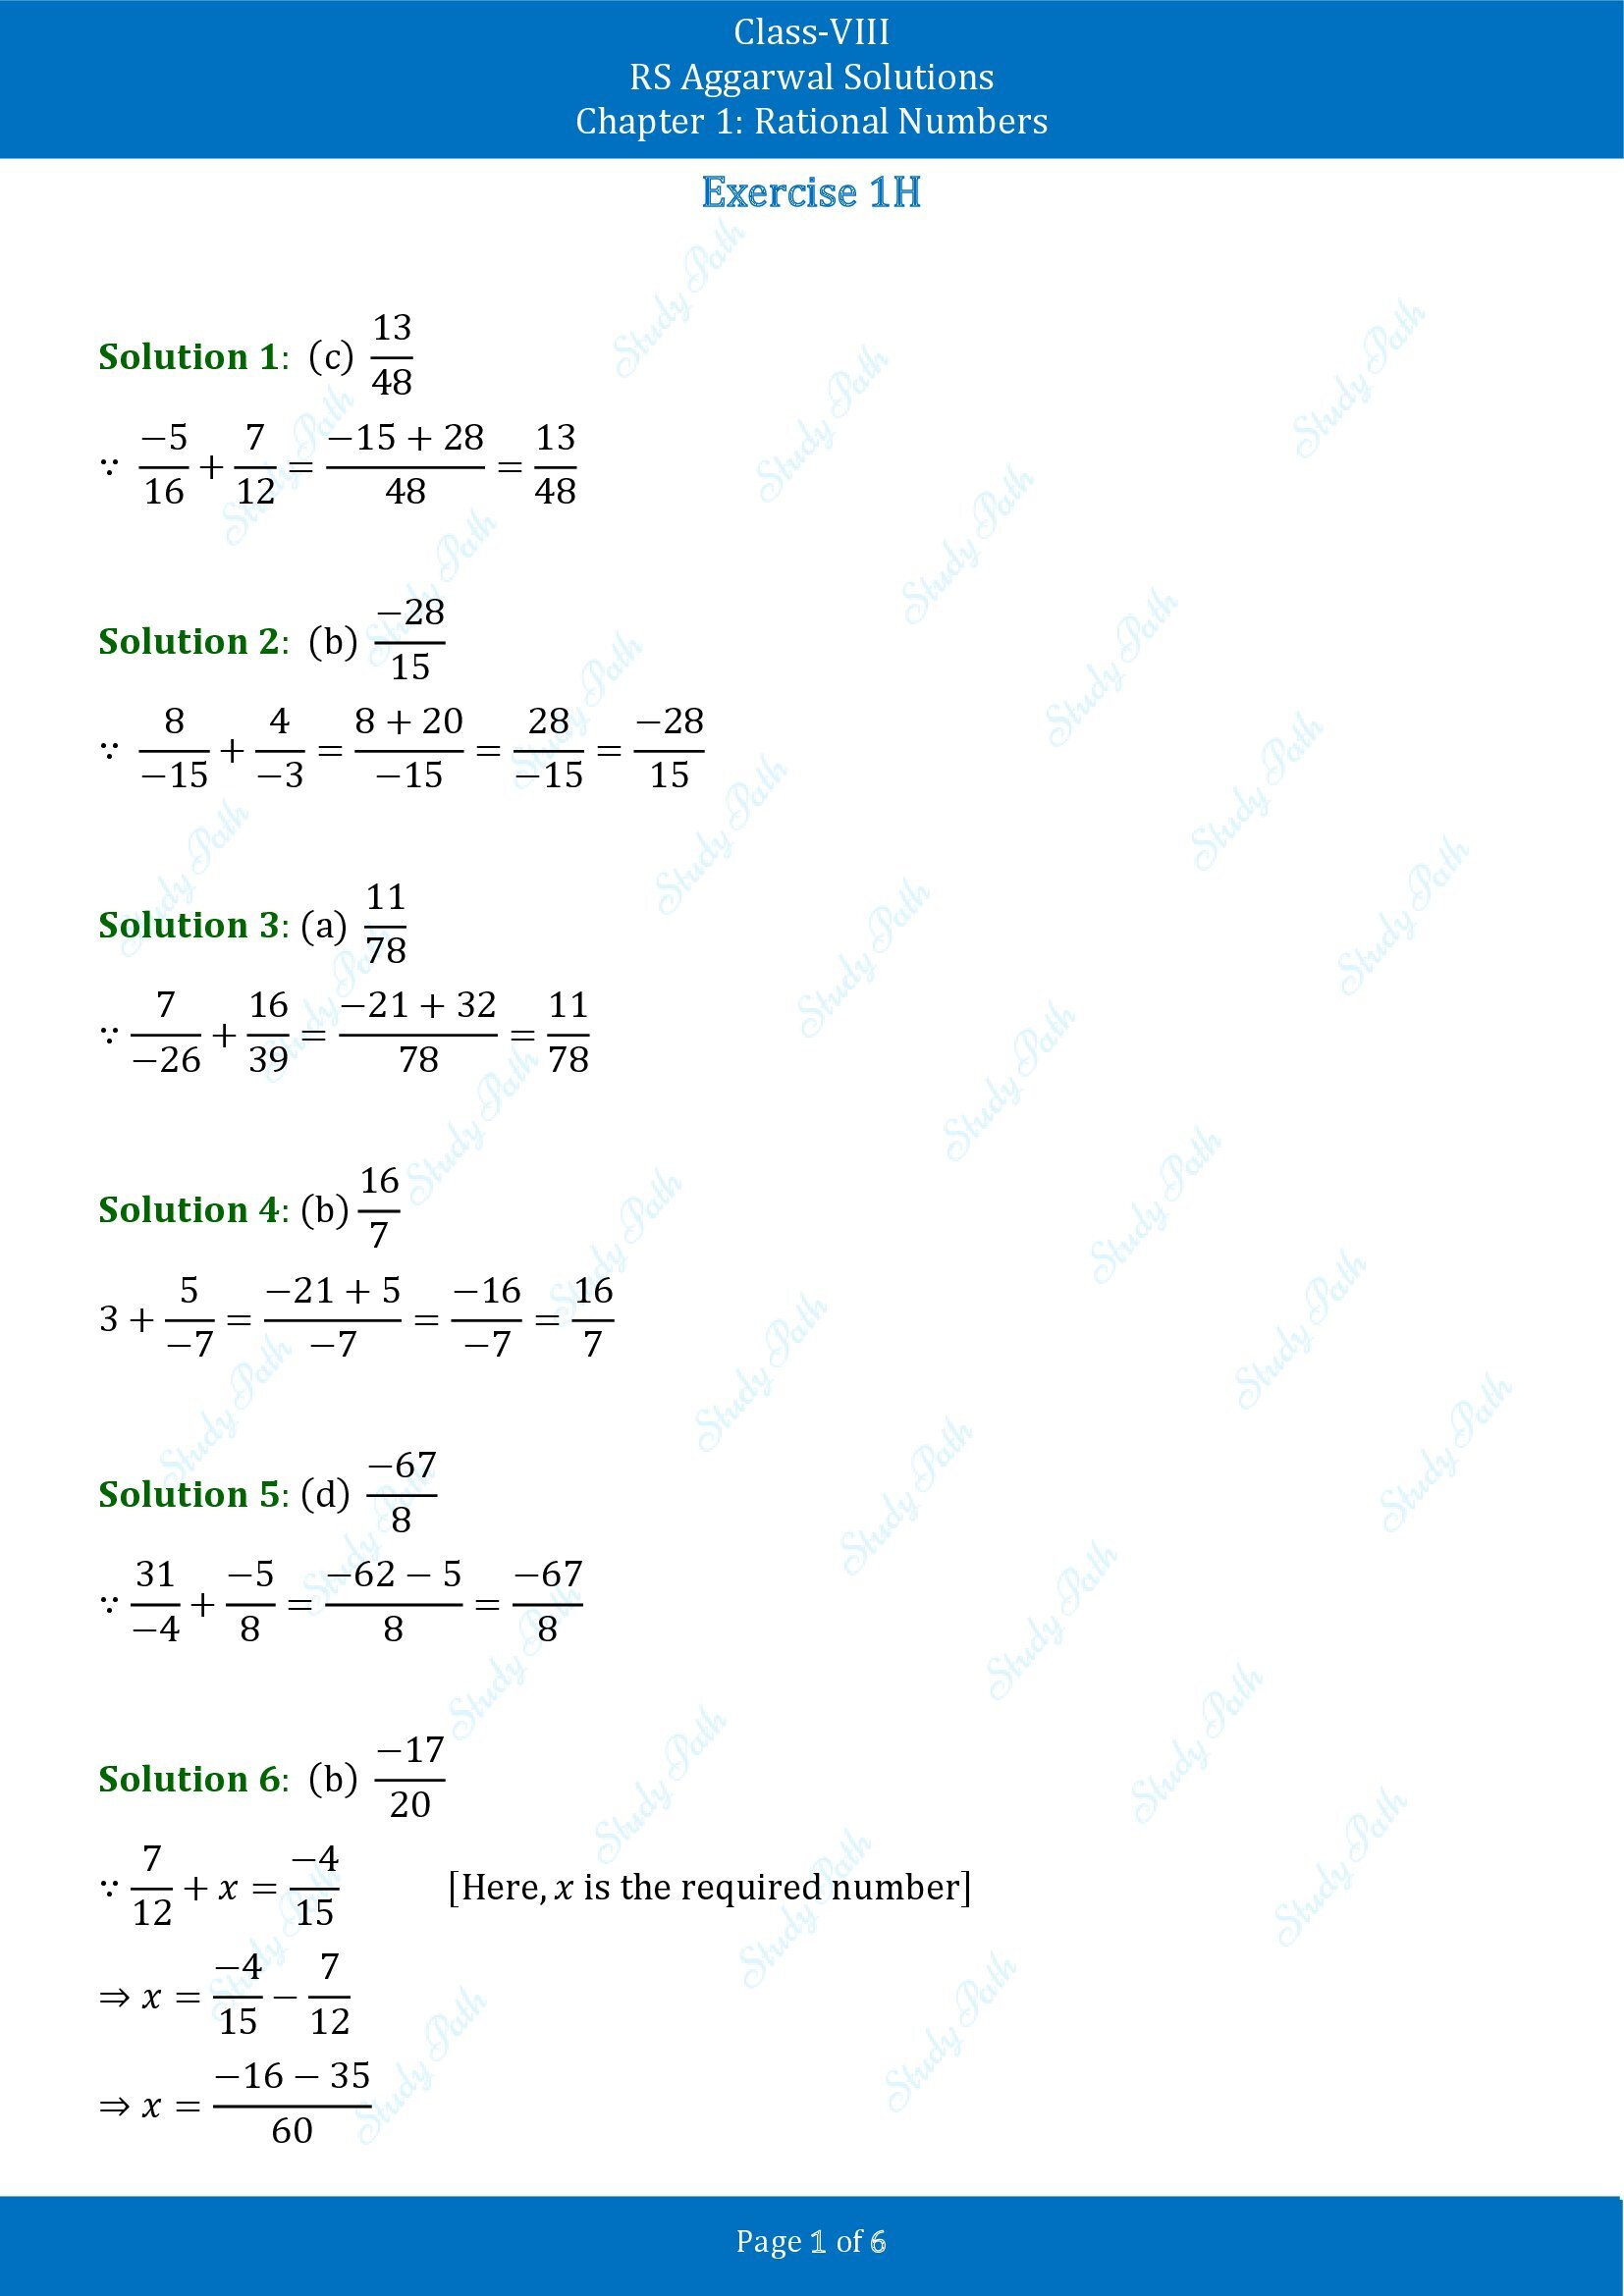 RS Aggarwal Solutions Class 8 Chapter 1 Rational Numbers Exercise 1H MCQs 00001